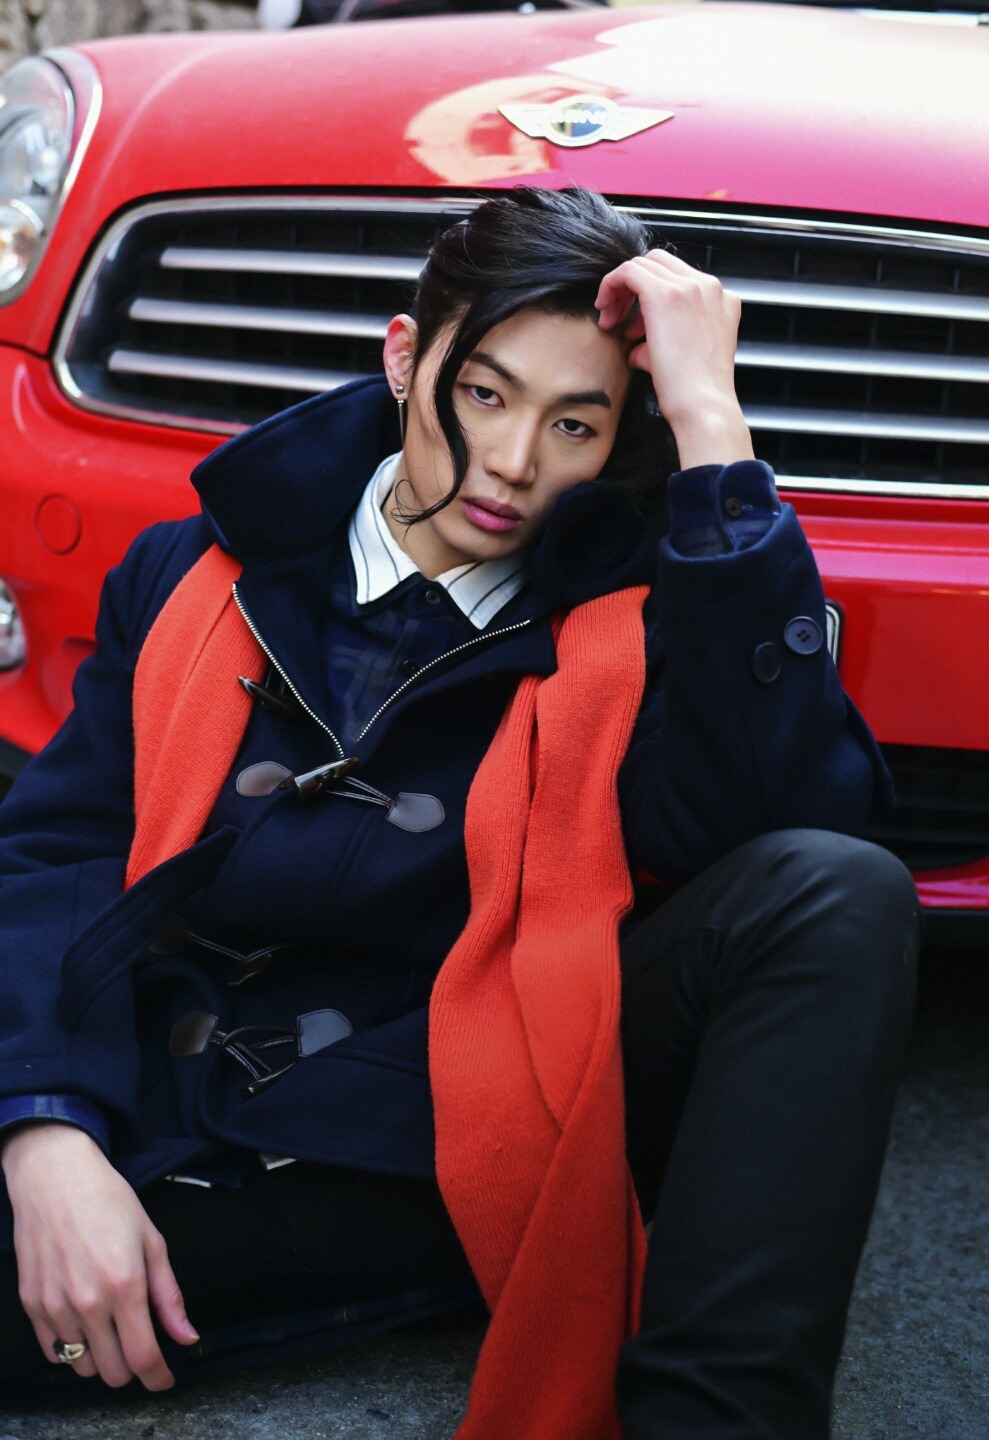 koreanmodel:    KOREANMODEL street-style project featuring Kim Sung Chan shot by